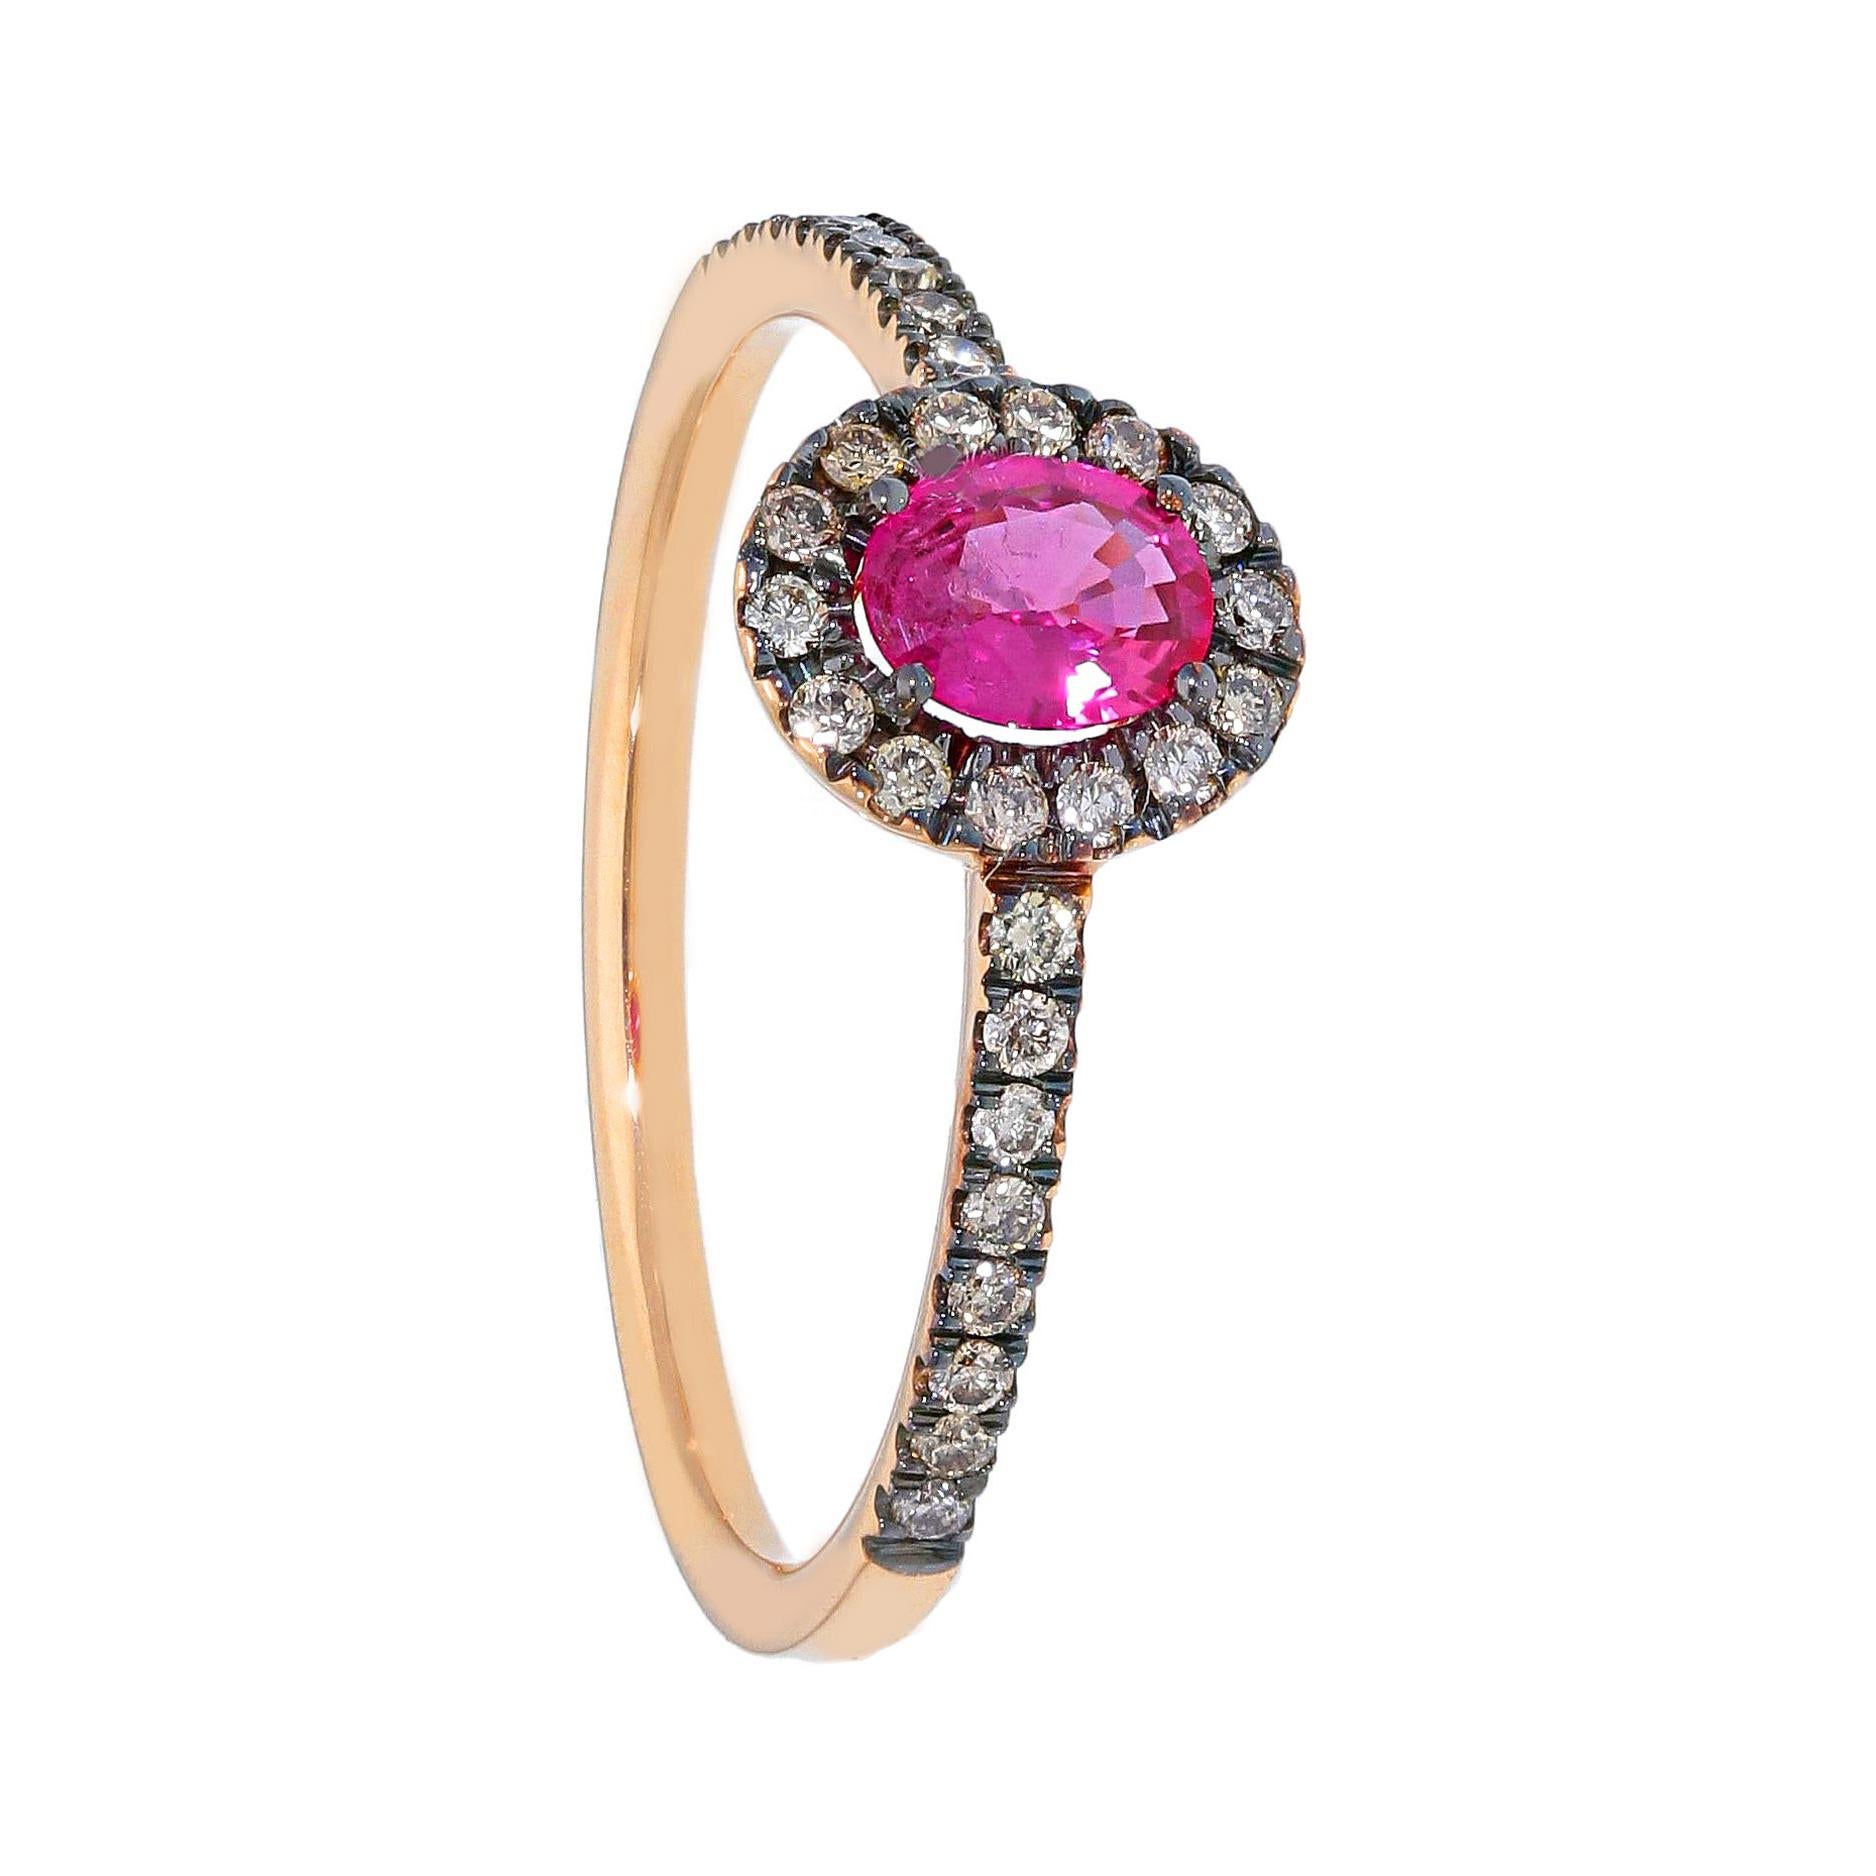 For Sale:  18K Rose & Black Gold Pradera Colourful Engagement Ring w/Rubys & Brown Diamonds